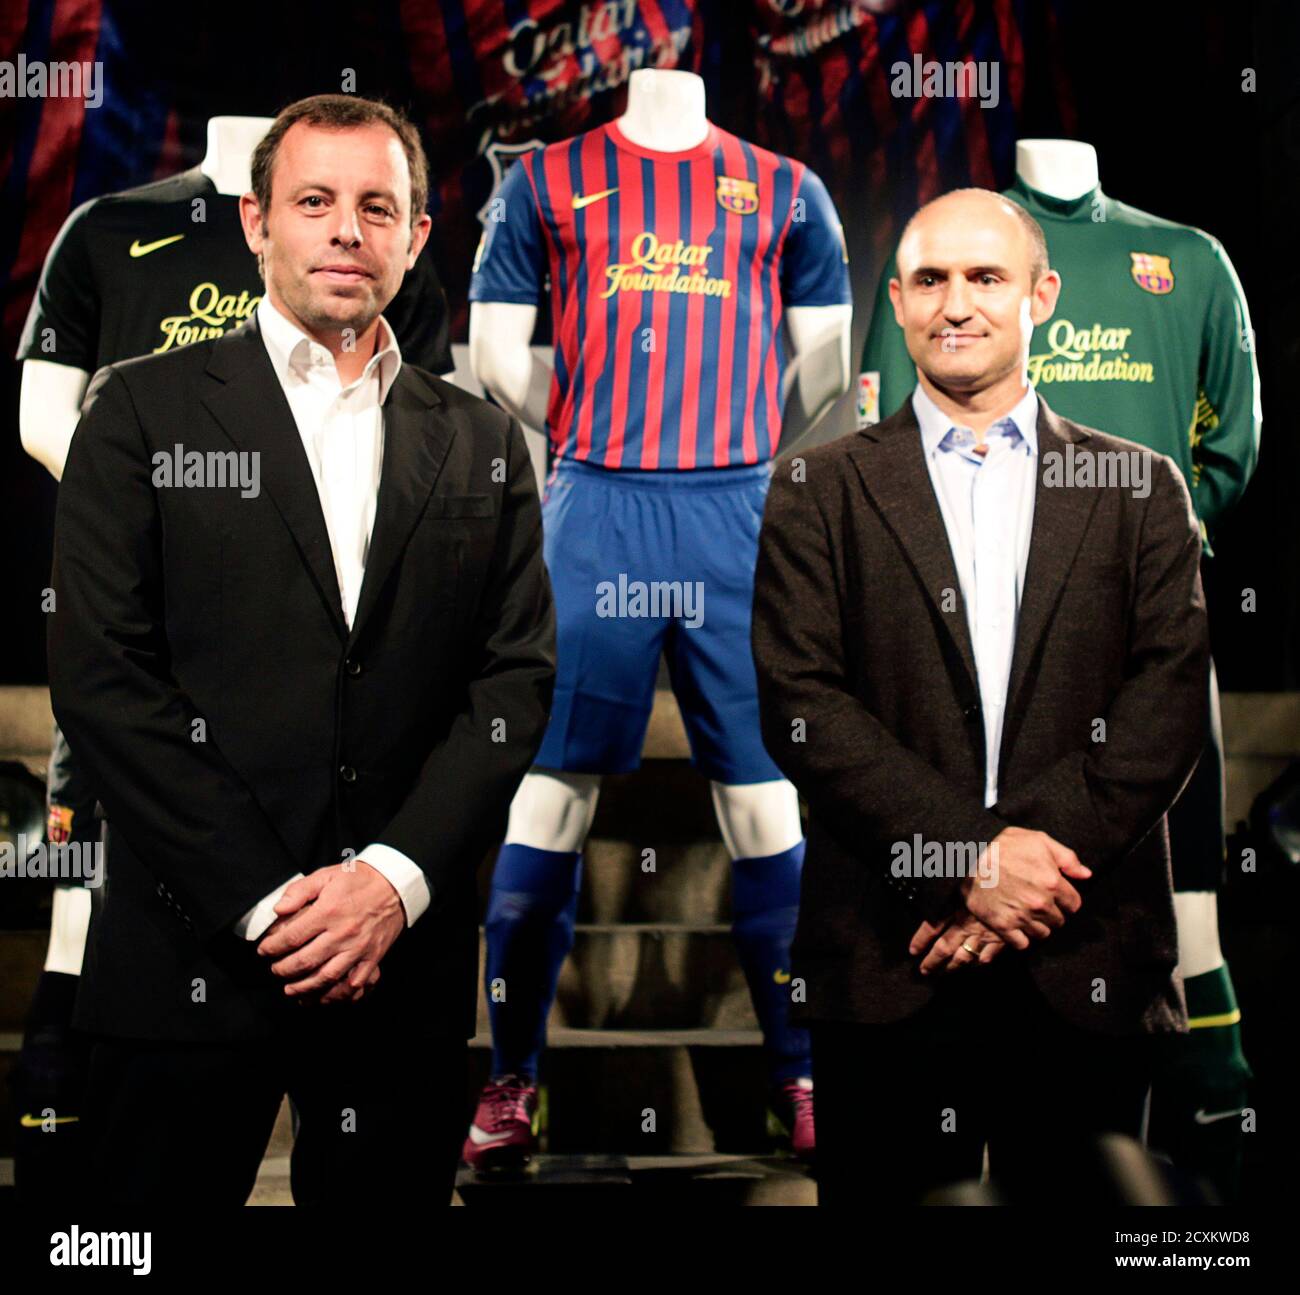 Barcelona's President Sandro Rosell (L) and Nike's Iberia President Marcos  Garzo pose with the new Barcelona jerseys for the 2011-2012 season with the  Qatar Foundation logo during a presentation at Camp Nou